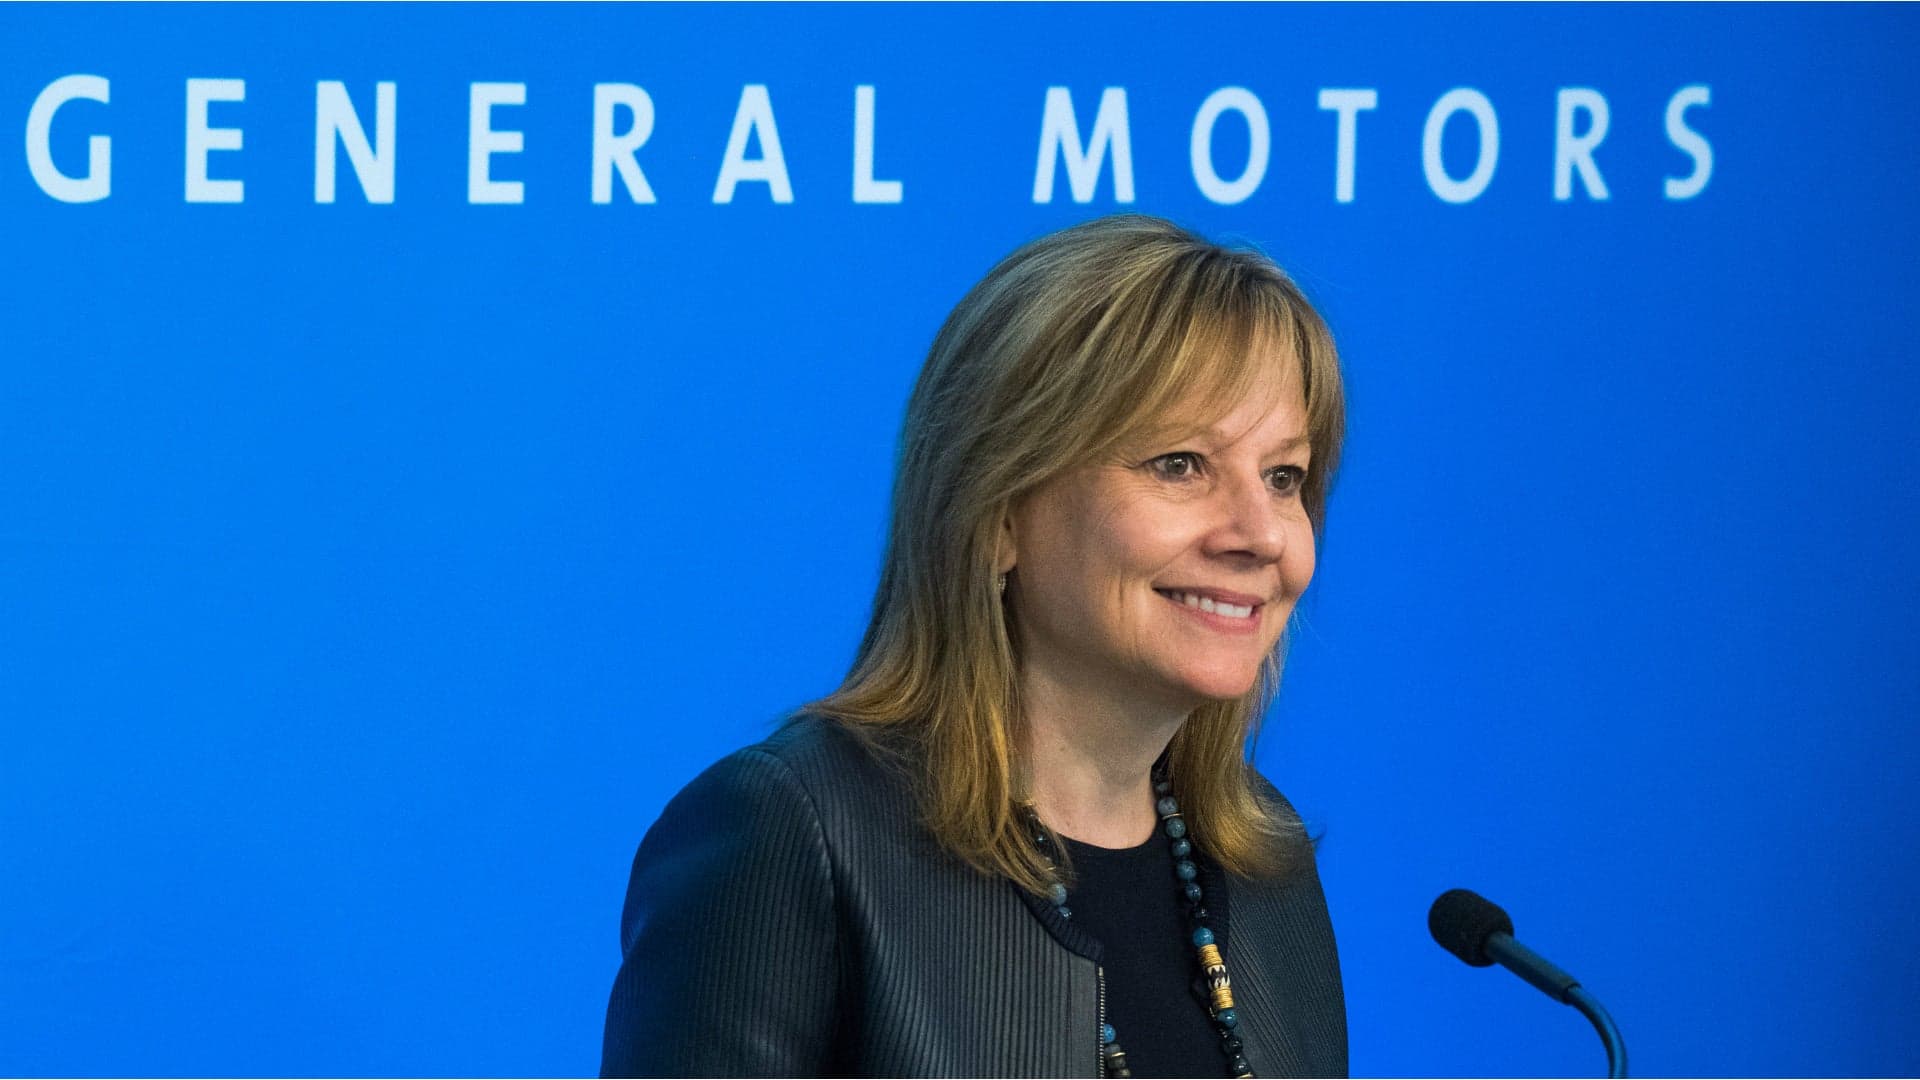 92 Percent of Recalled GM Ignition Switches Have Been Replaced, Report Says